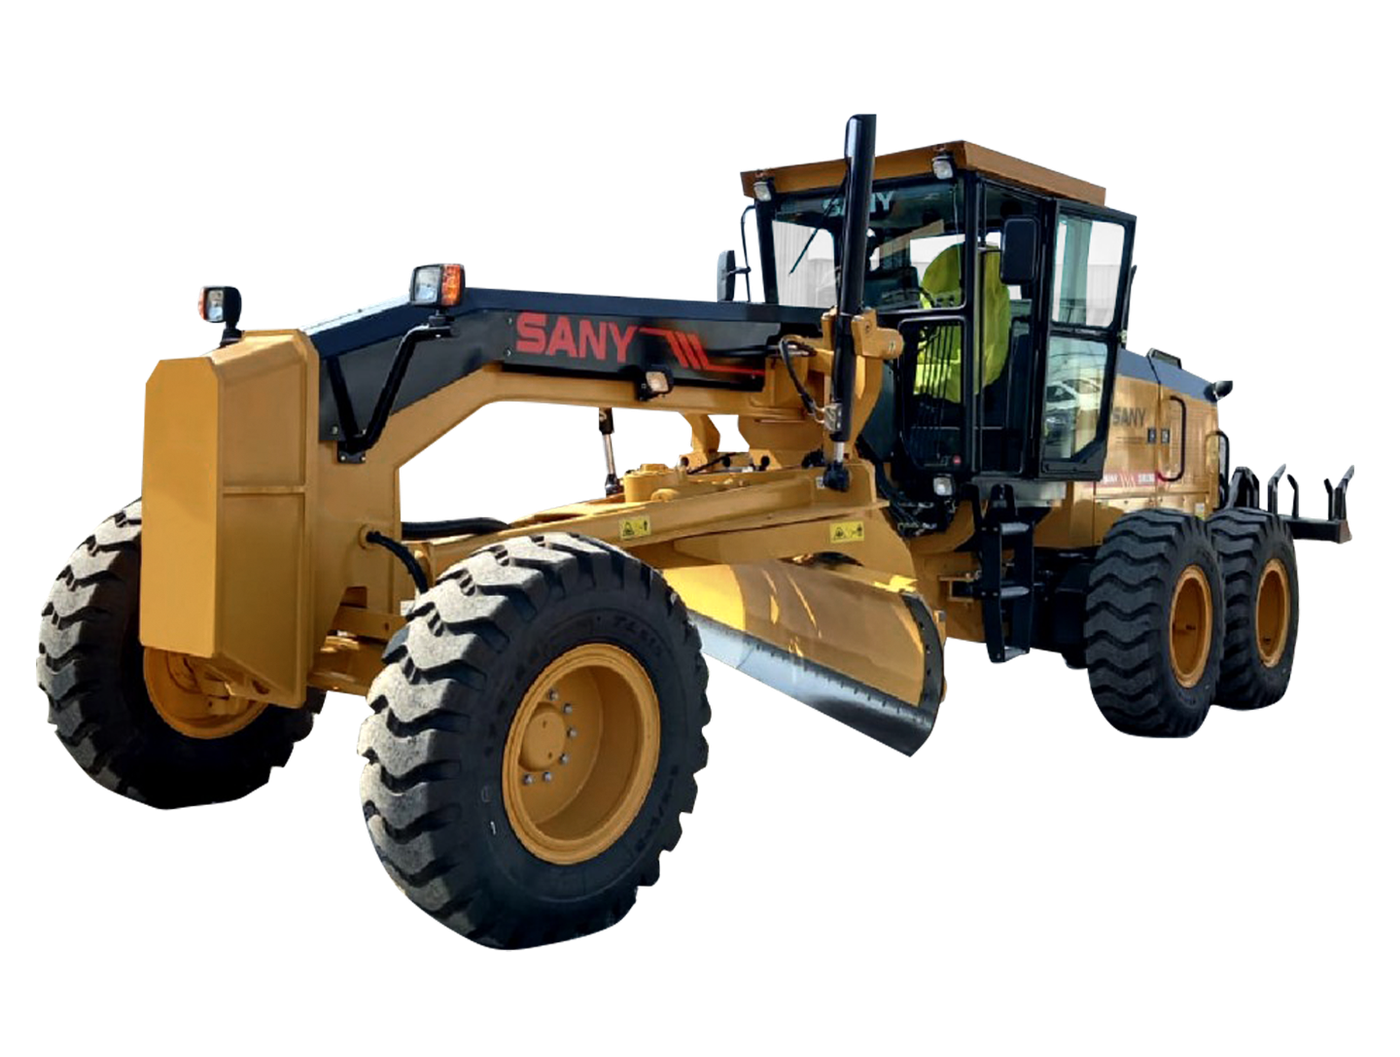 sany-smg200-motor-grader-available-for-sale-or-rental-near-you